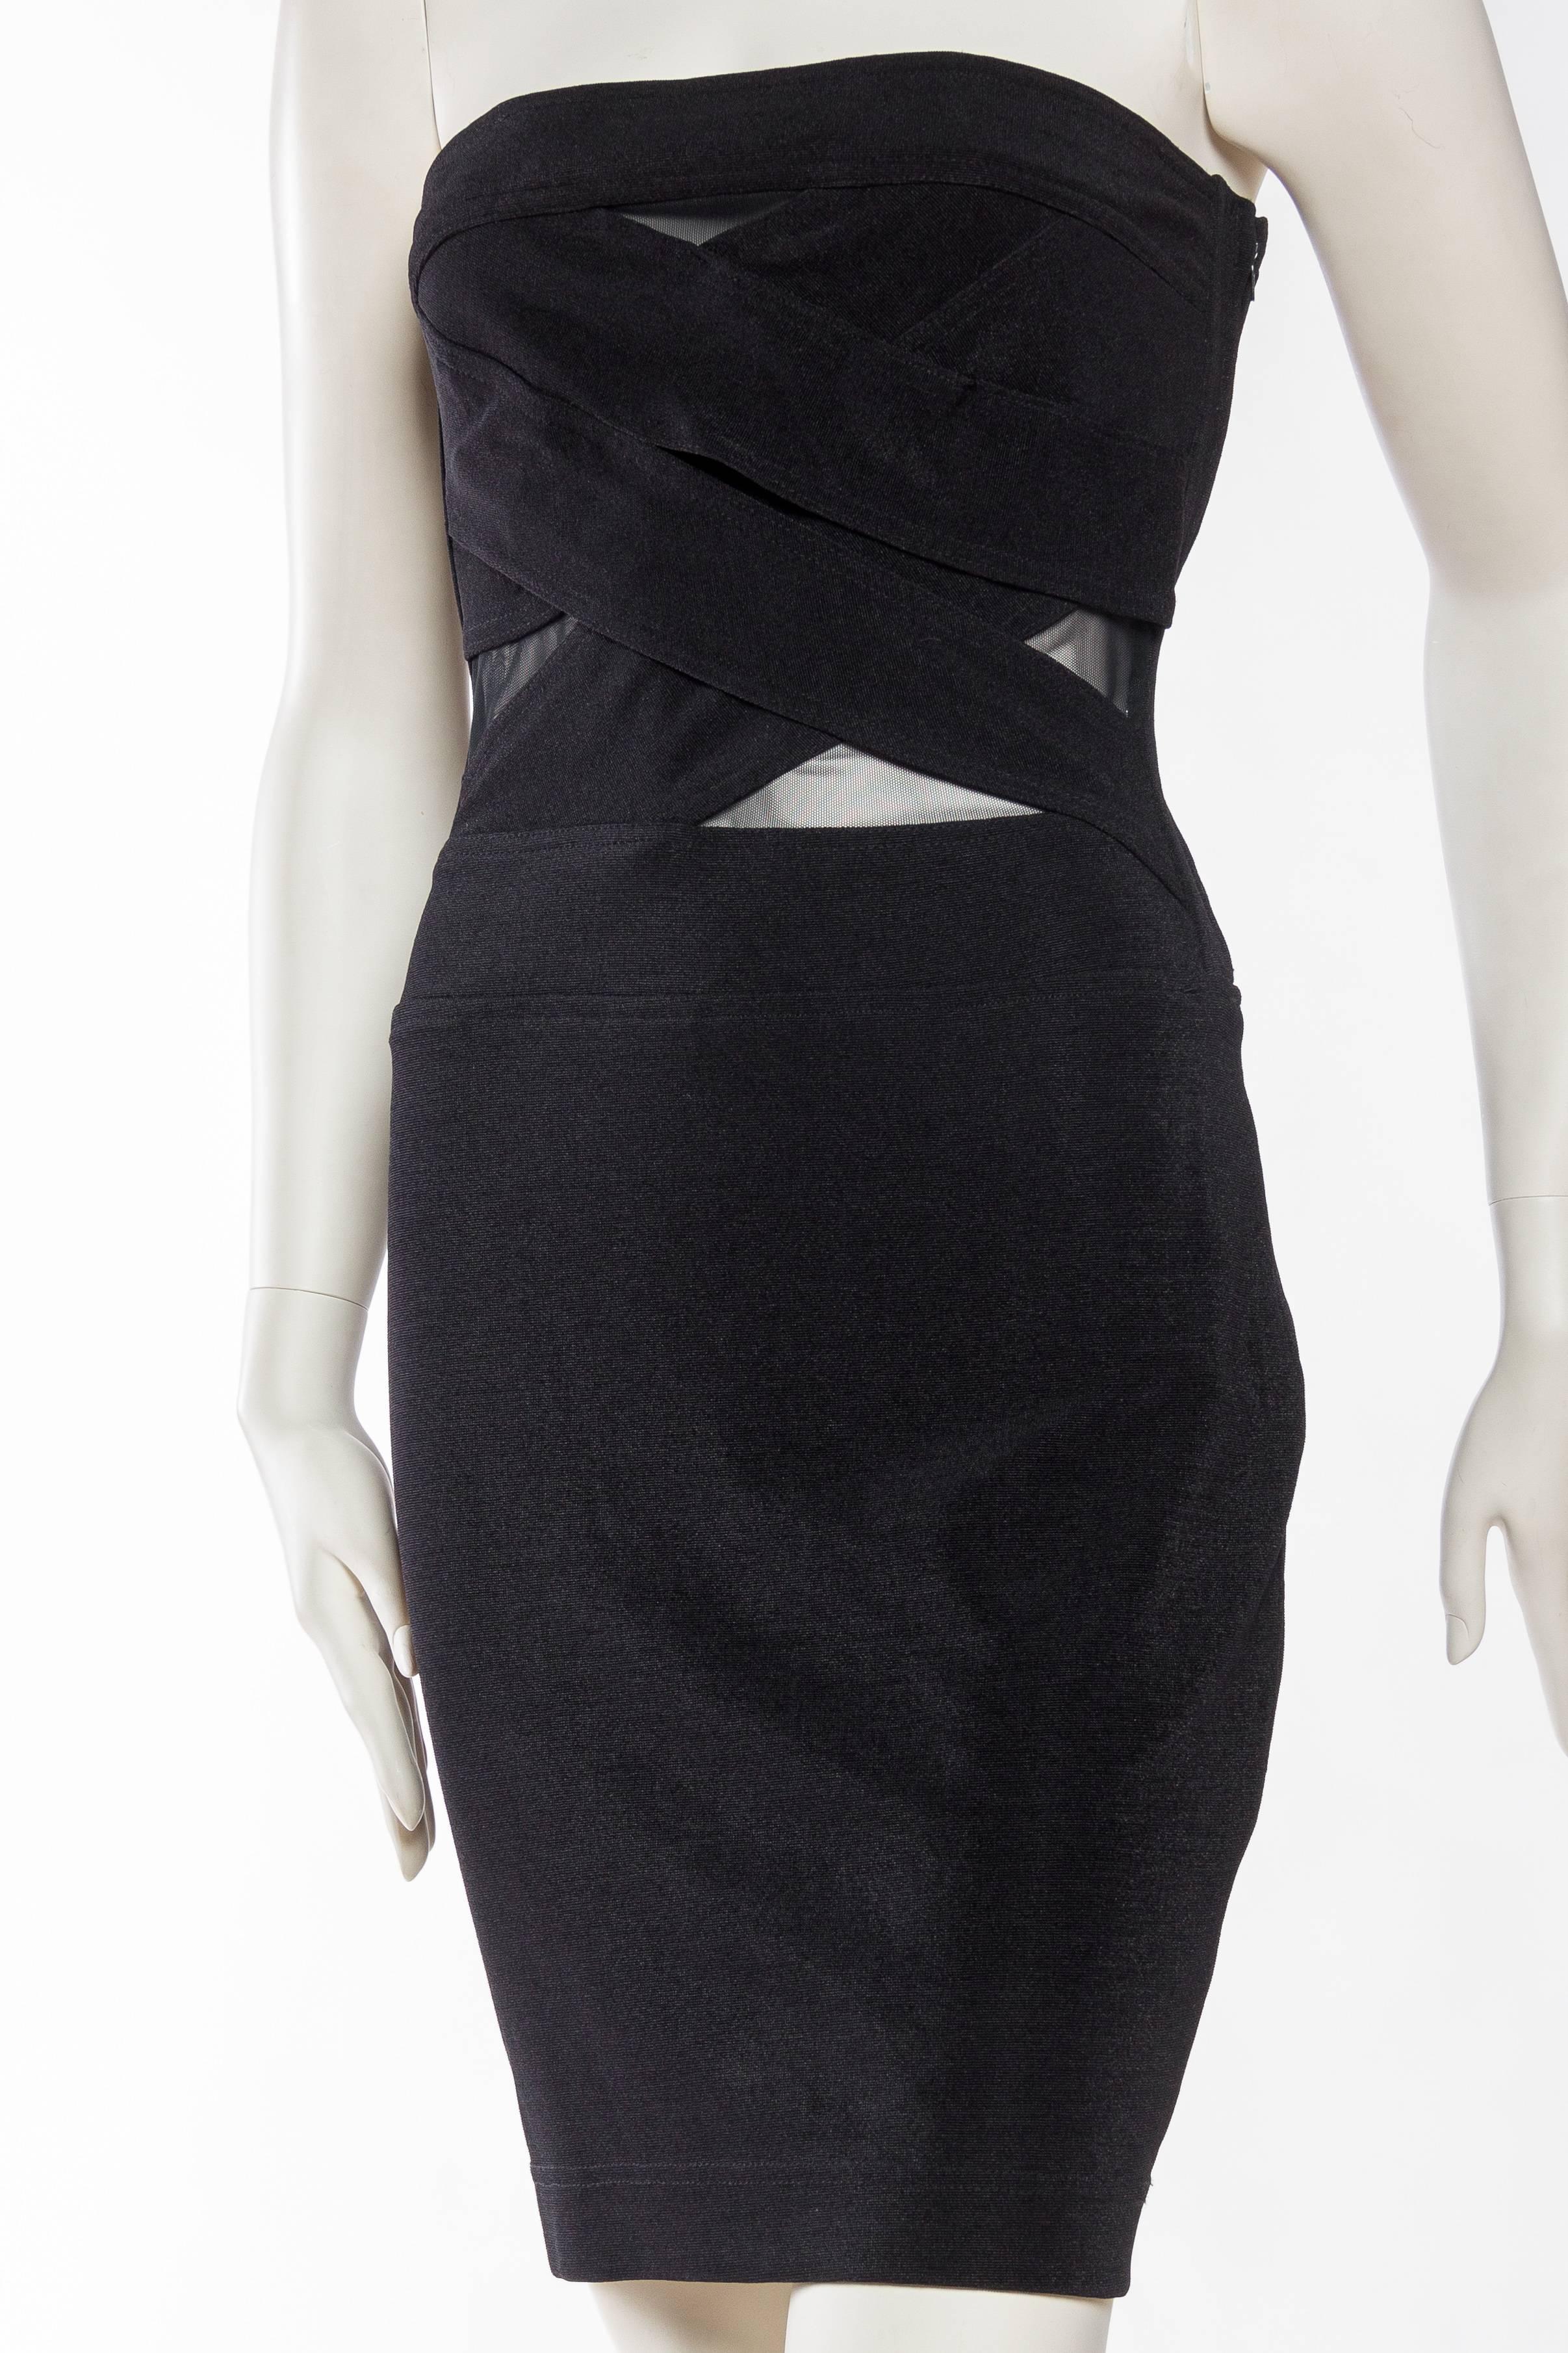 They say fashion changes but the LBD will never go out of style, especially with the sexy and unique detail as seen on this dress. Clipped to fit our mannequin, fits more to a medium and almost large size. 